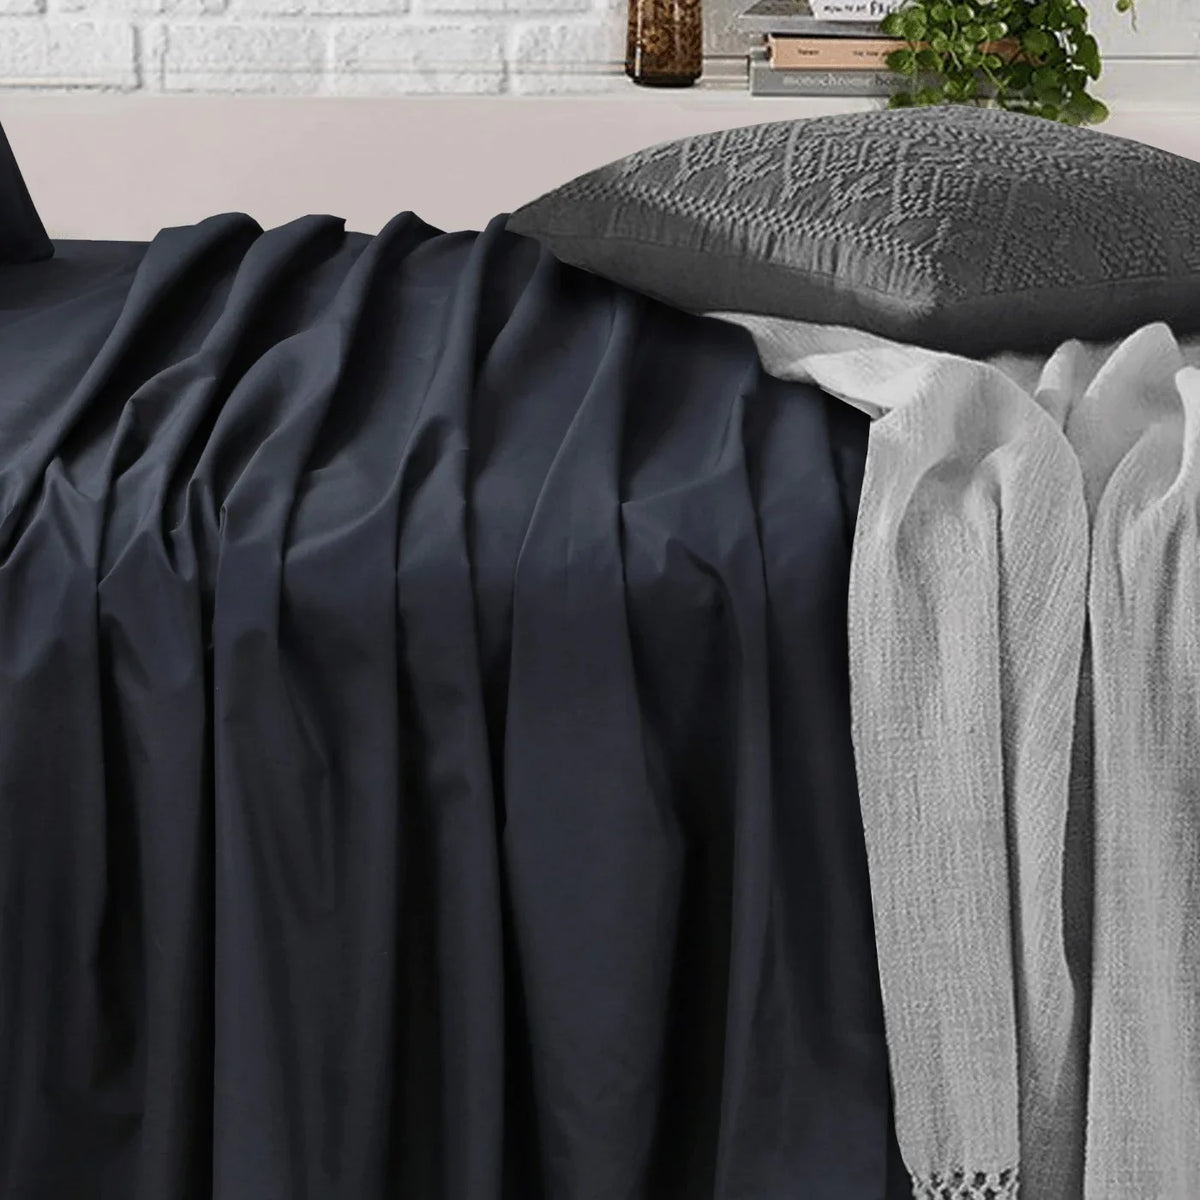 Flat and Fitted Bedsheets Set With Pillowcases -Black